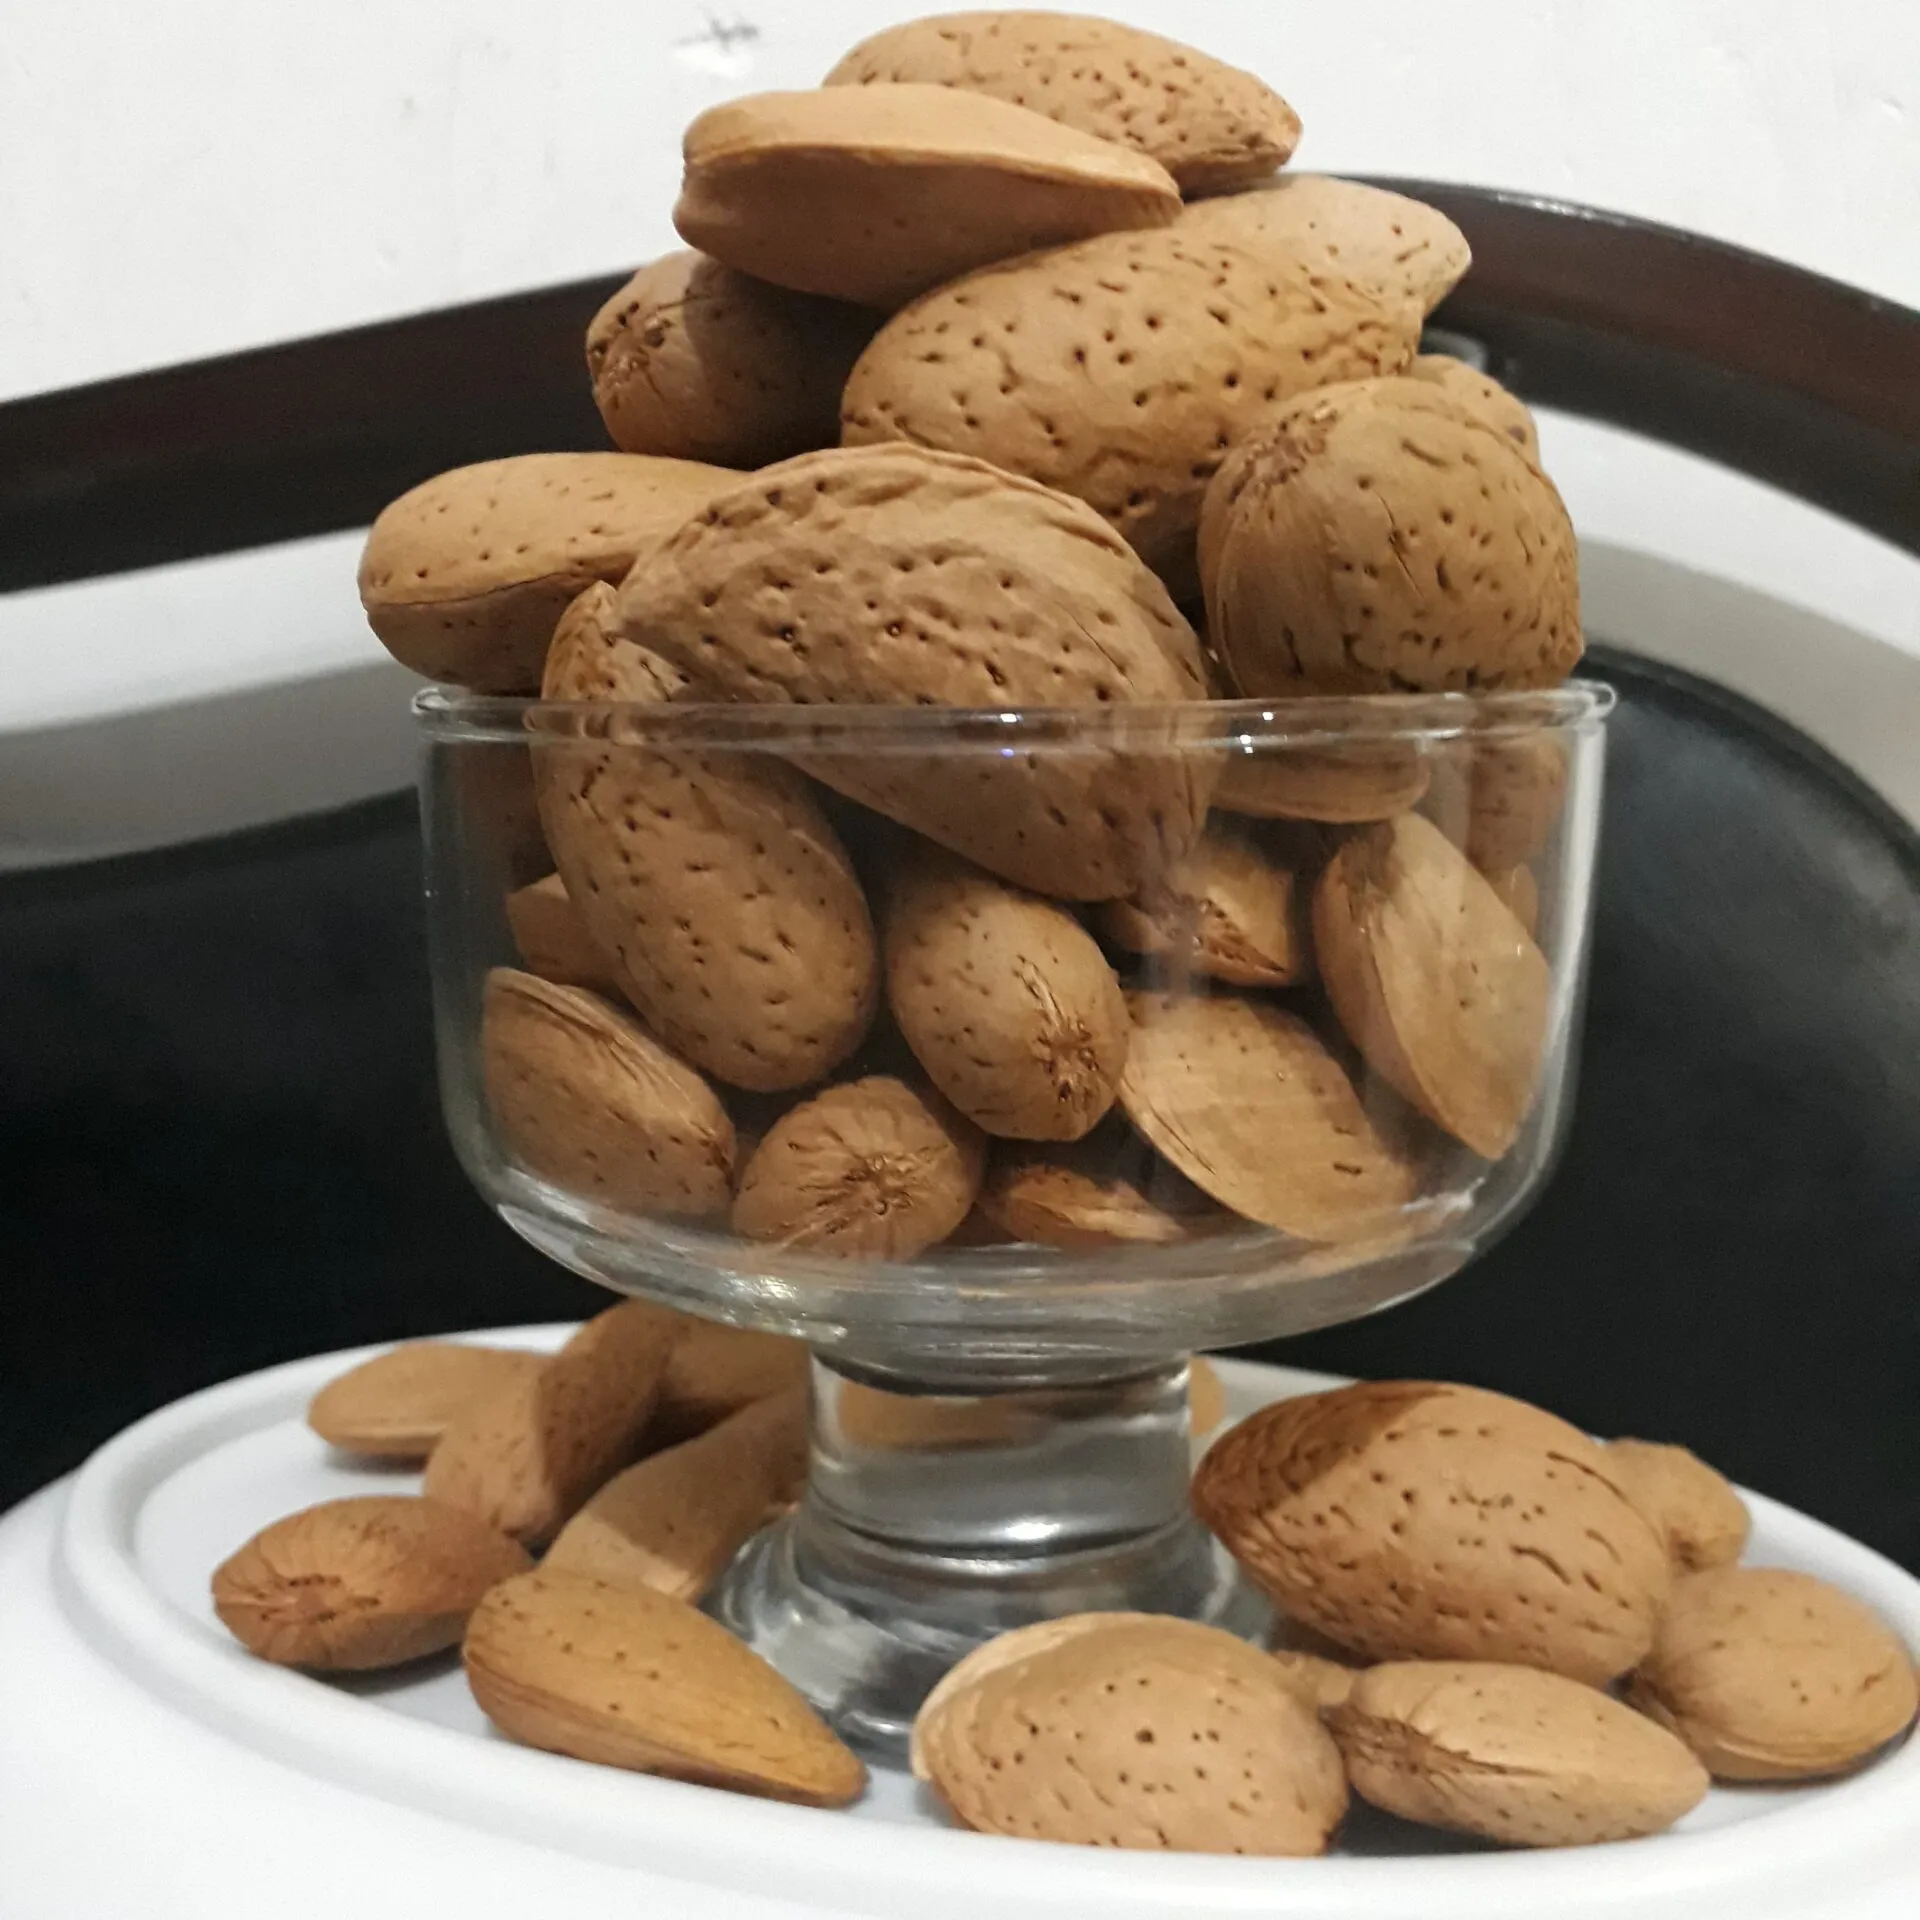 The purchase price of almond fruit edible + training